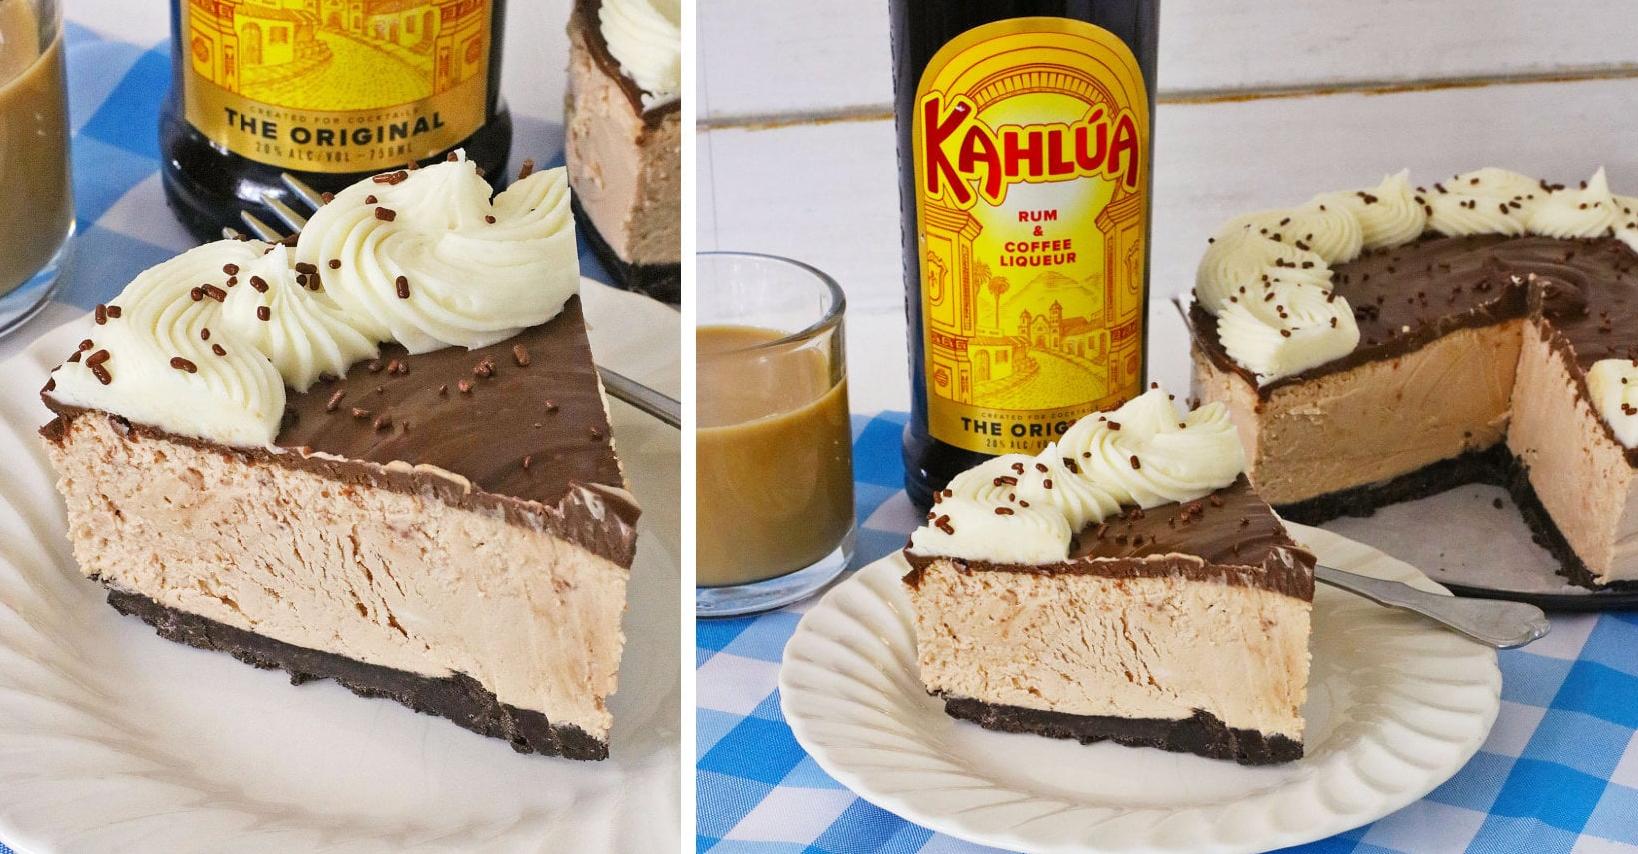  The combination of Kahlua and cream cheese is simply divine.